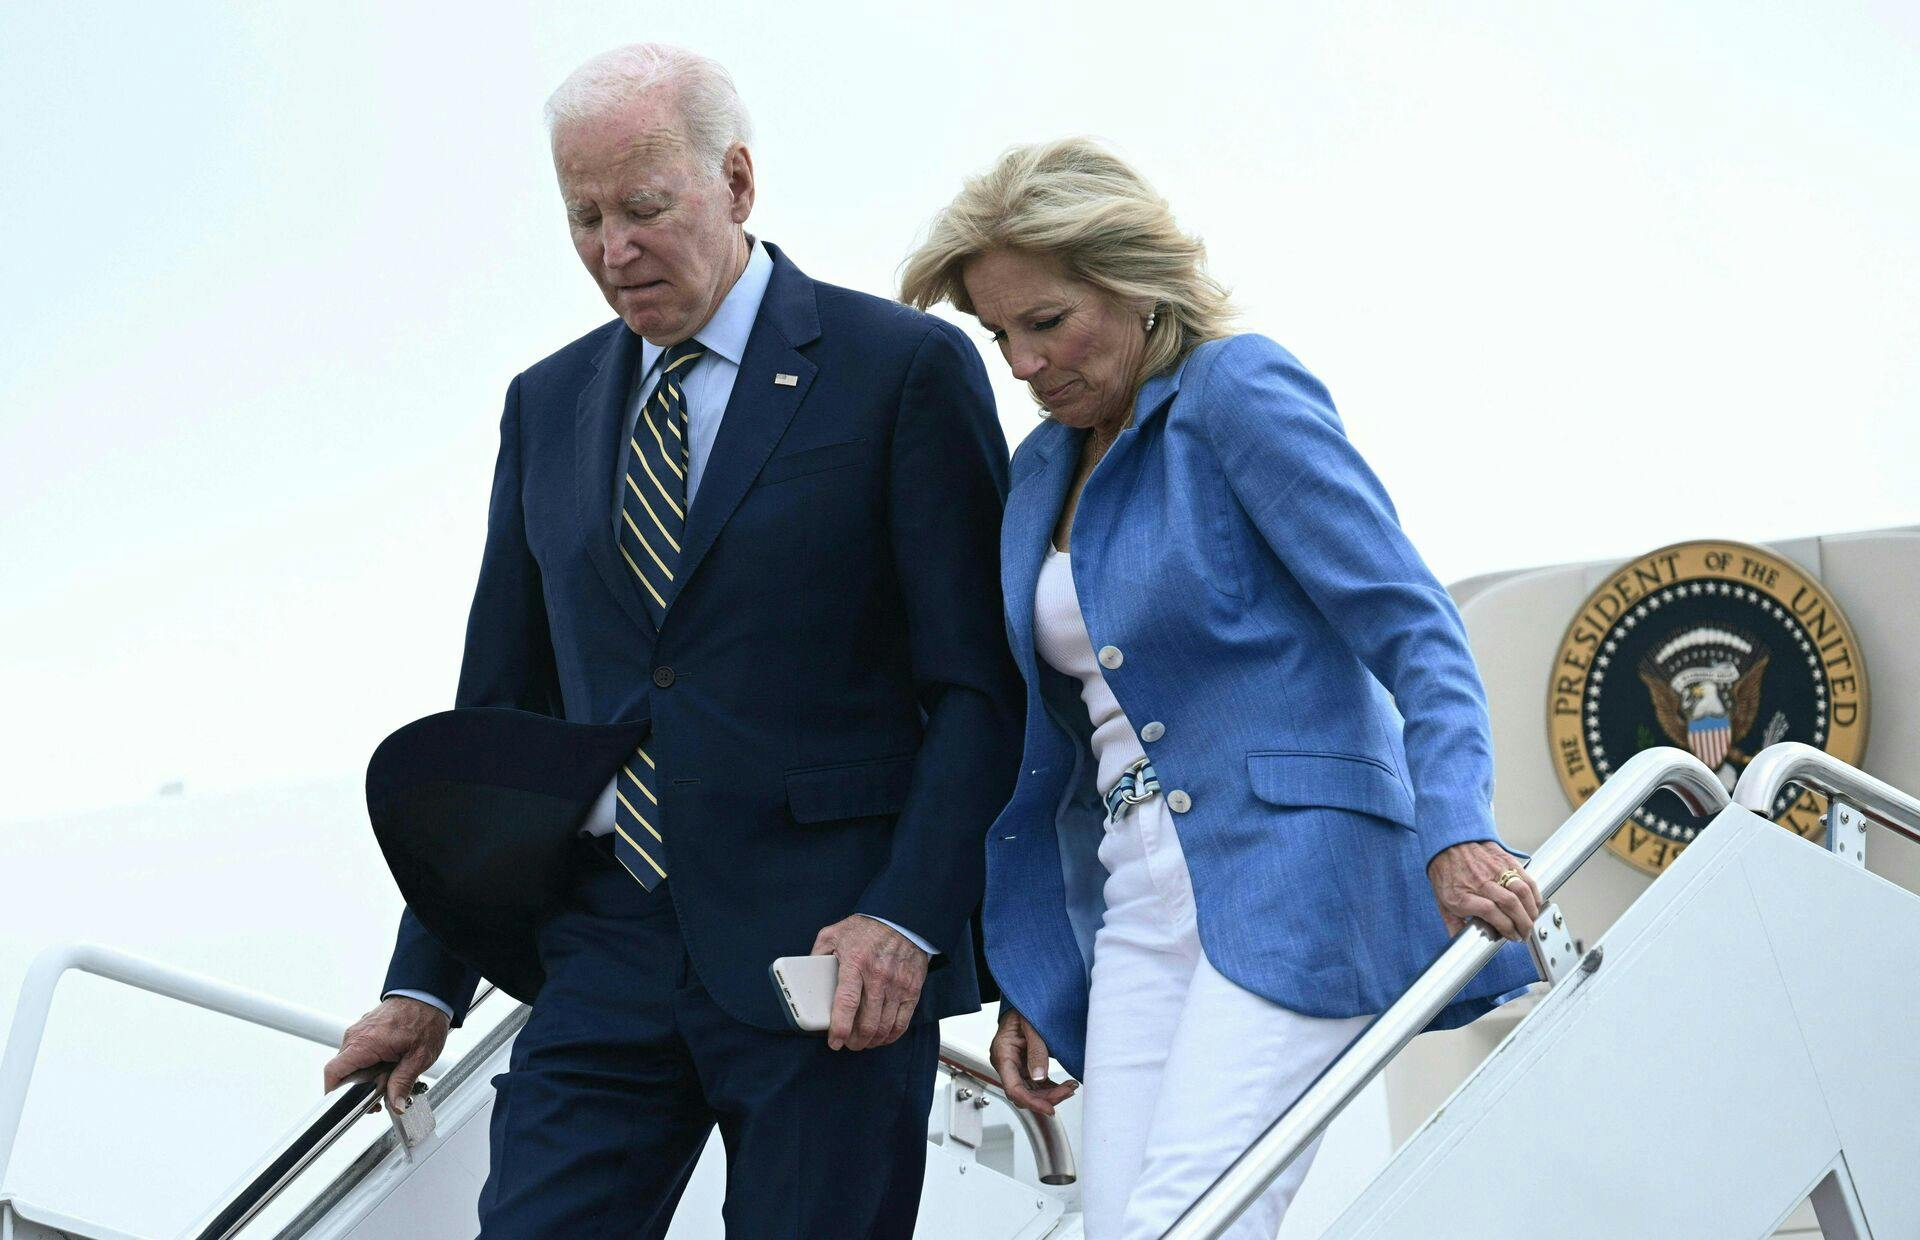 US President Joe Biden and First Lady Jill Biden arrive at Joint Base Andrews in Maryland on August 7, 2023. (Photo by Brendan SMIALOWSKI / AFP)